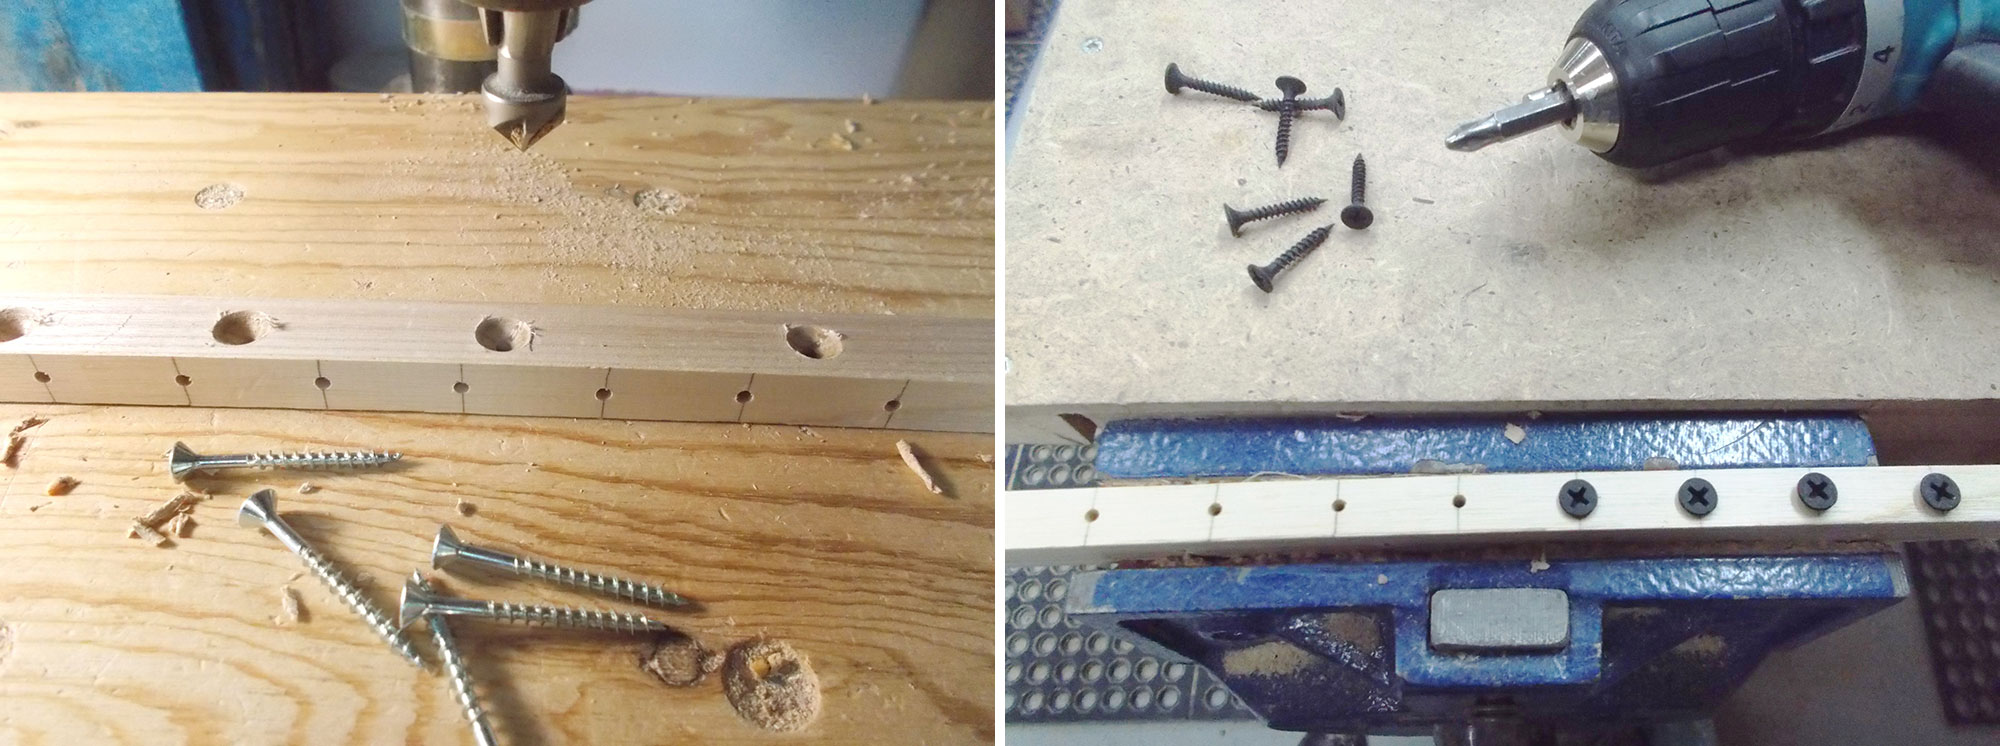 Image left: Countersink through-holes and five screws. Image right: Electric drill, six screws and pre-drilled hardwood in bench vise.